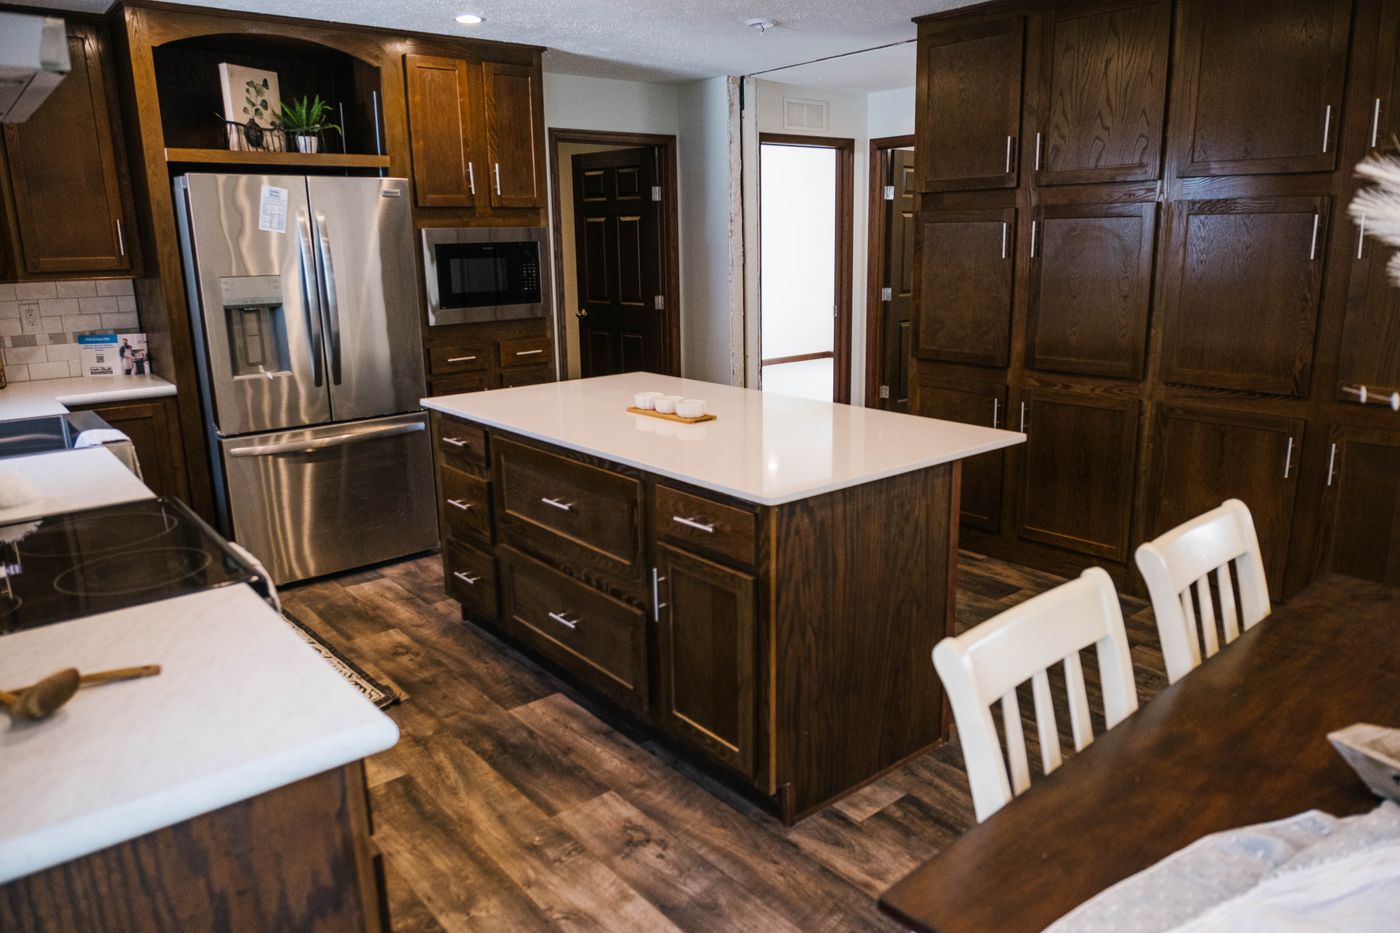 The LEGACY 377 Kitchen. This Manufactured Mobile Home features 3 bedrooms and 2 baths.